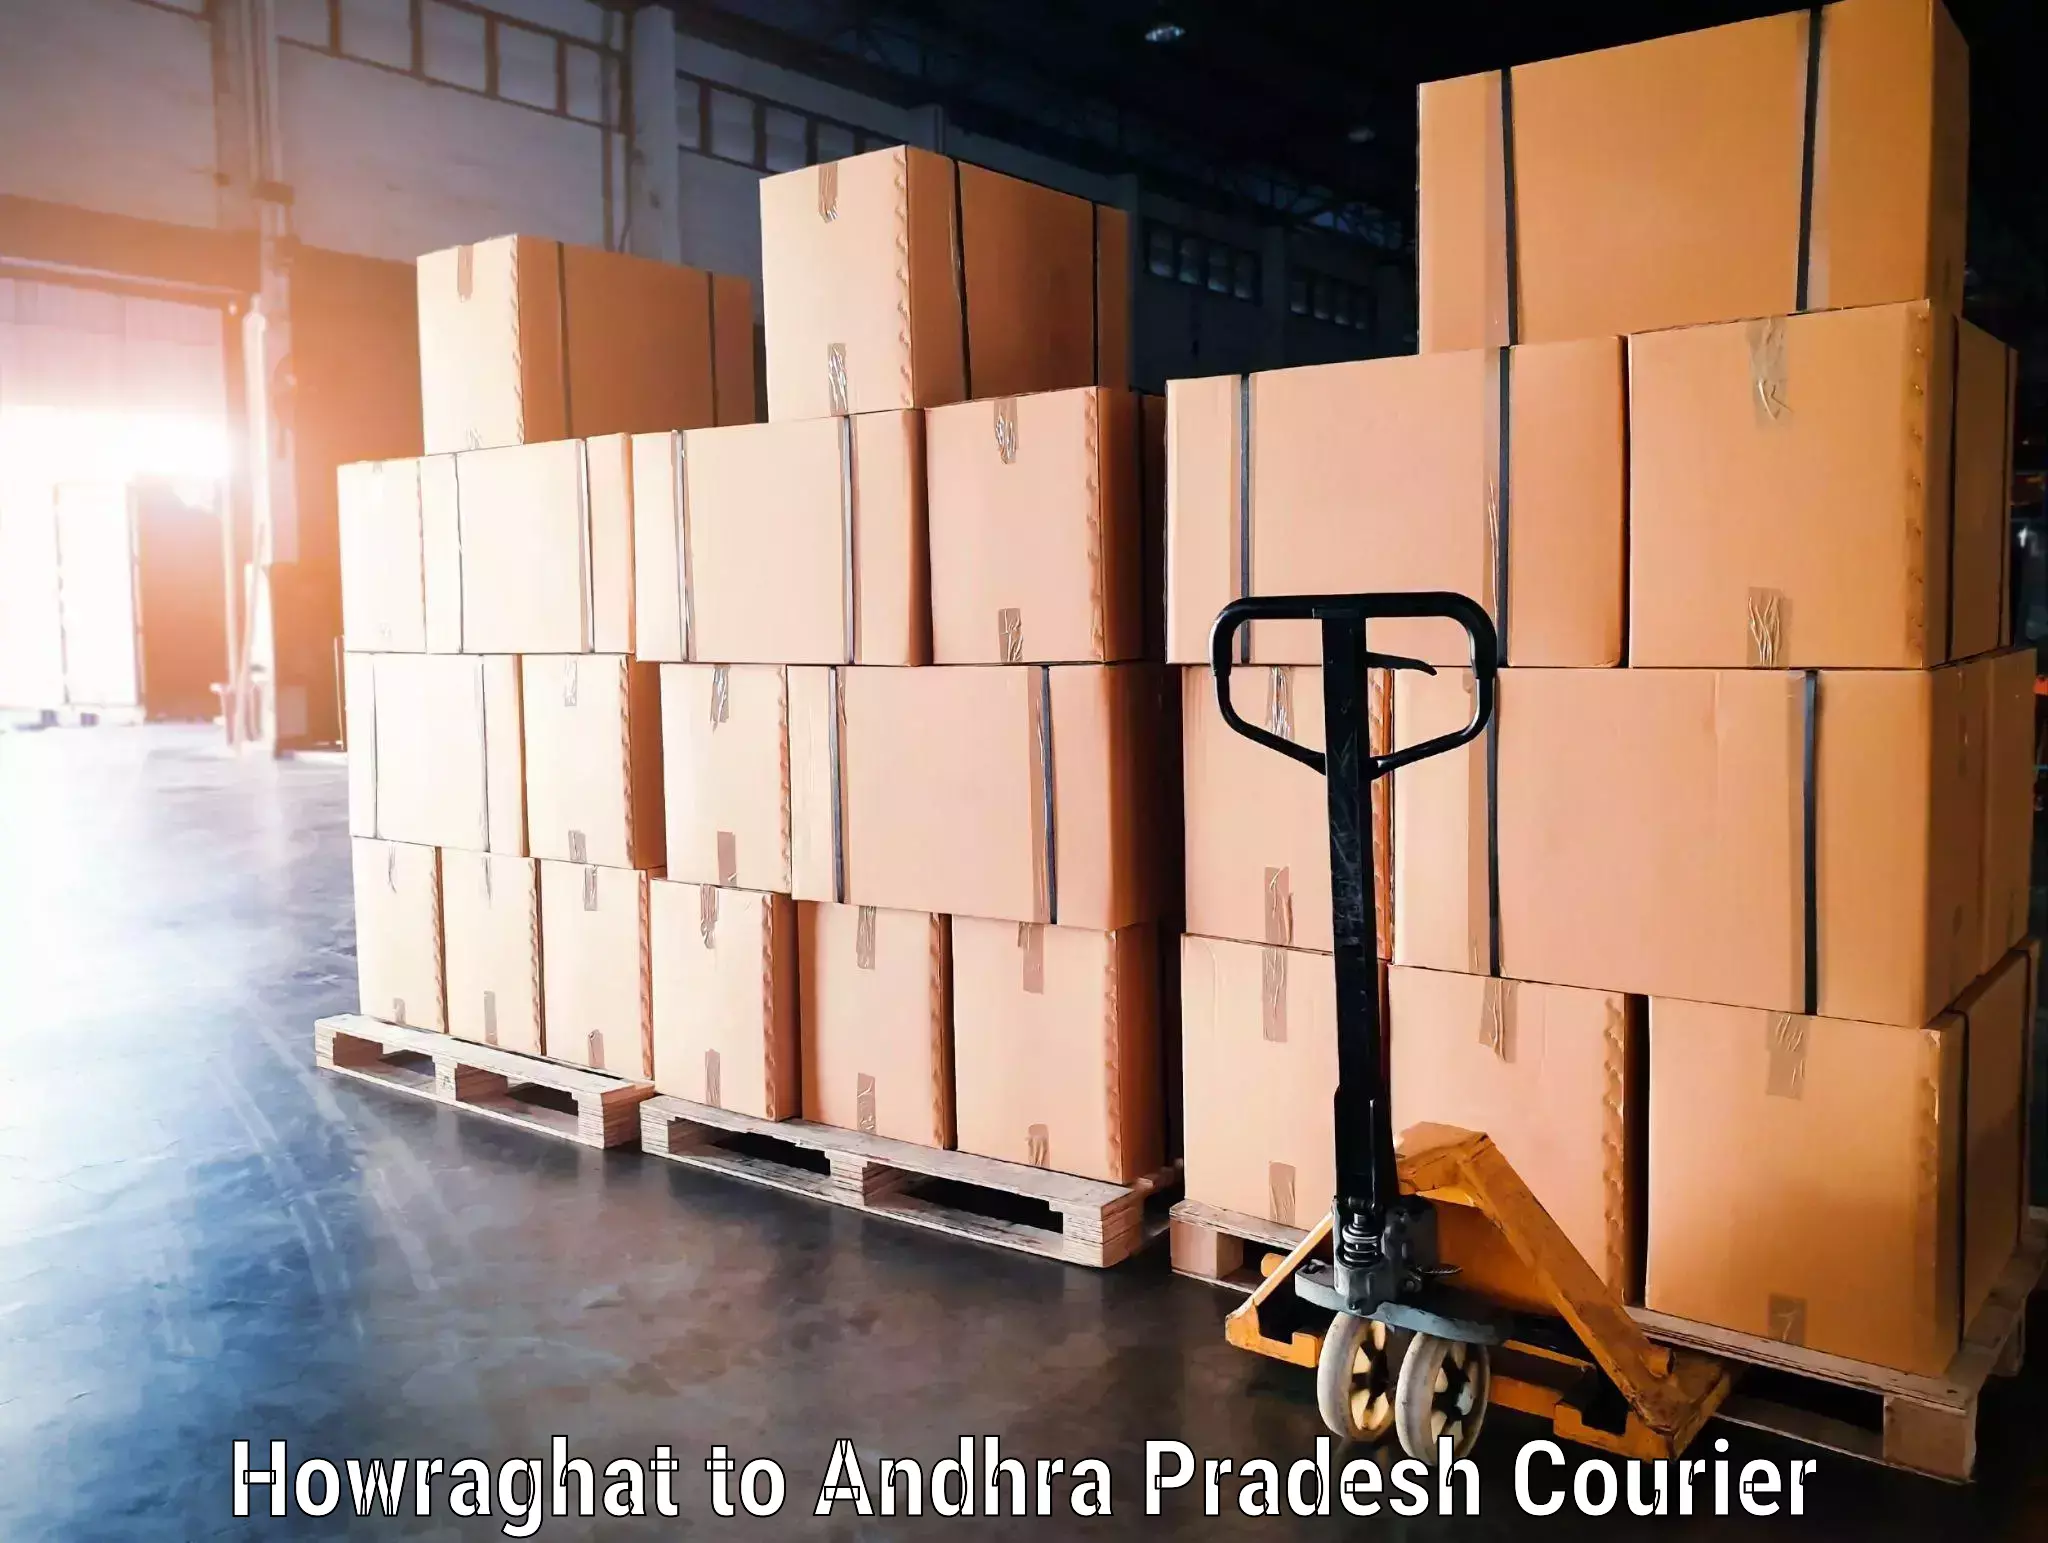 Luggage shipment tracking Howraghat to Chittoor